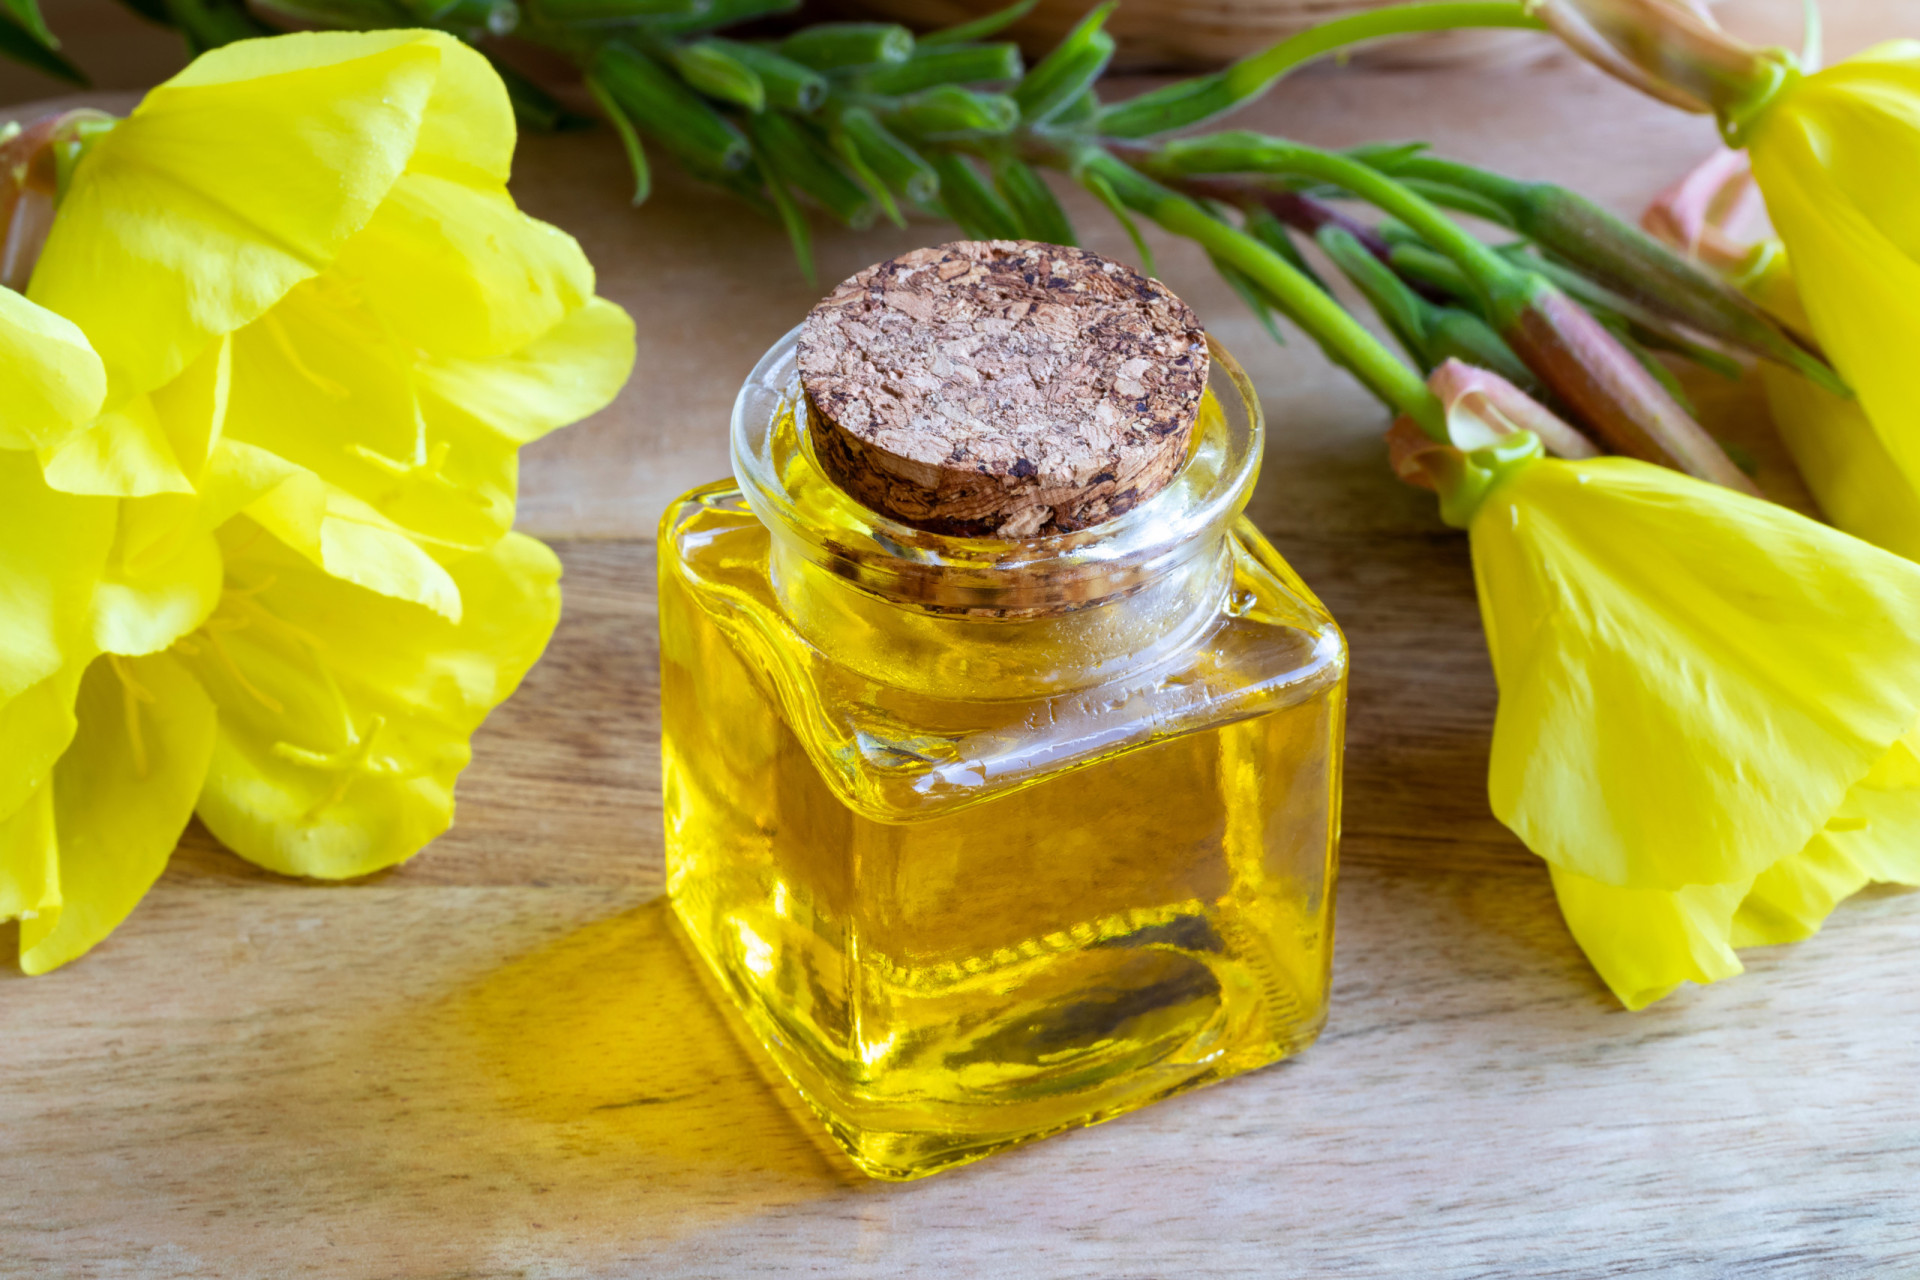 <p>Evening primrose oil (<em>oenothera biennis</em>) may potentiate the effects of antiplatelet and anticoagulant drugs. But according to clinical evidence, there is a low level of risk. In addition, a case report has shown a reduction in serum levels of lithium.</p><p><a href="https://www.msn.com/en-us/community/channel/vid-7xx8mnucu55yw63we9va2gwr7uihbxwc68fxqp25x6tg4ftibpra?cvid=94631541bc0f4f89bfd59158d696ad7e">Follow us and access great exclusive content every day</a></p>